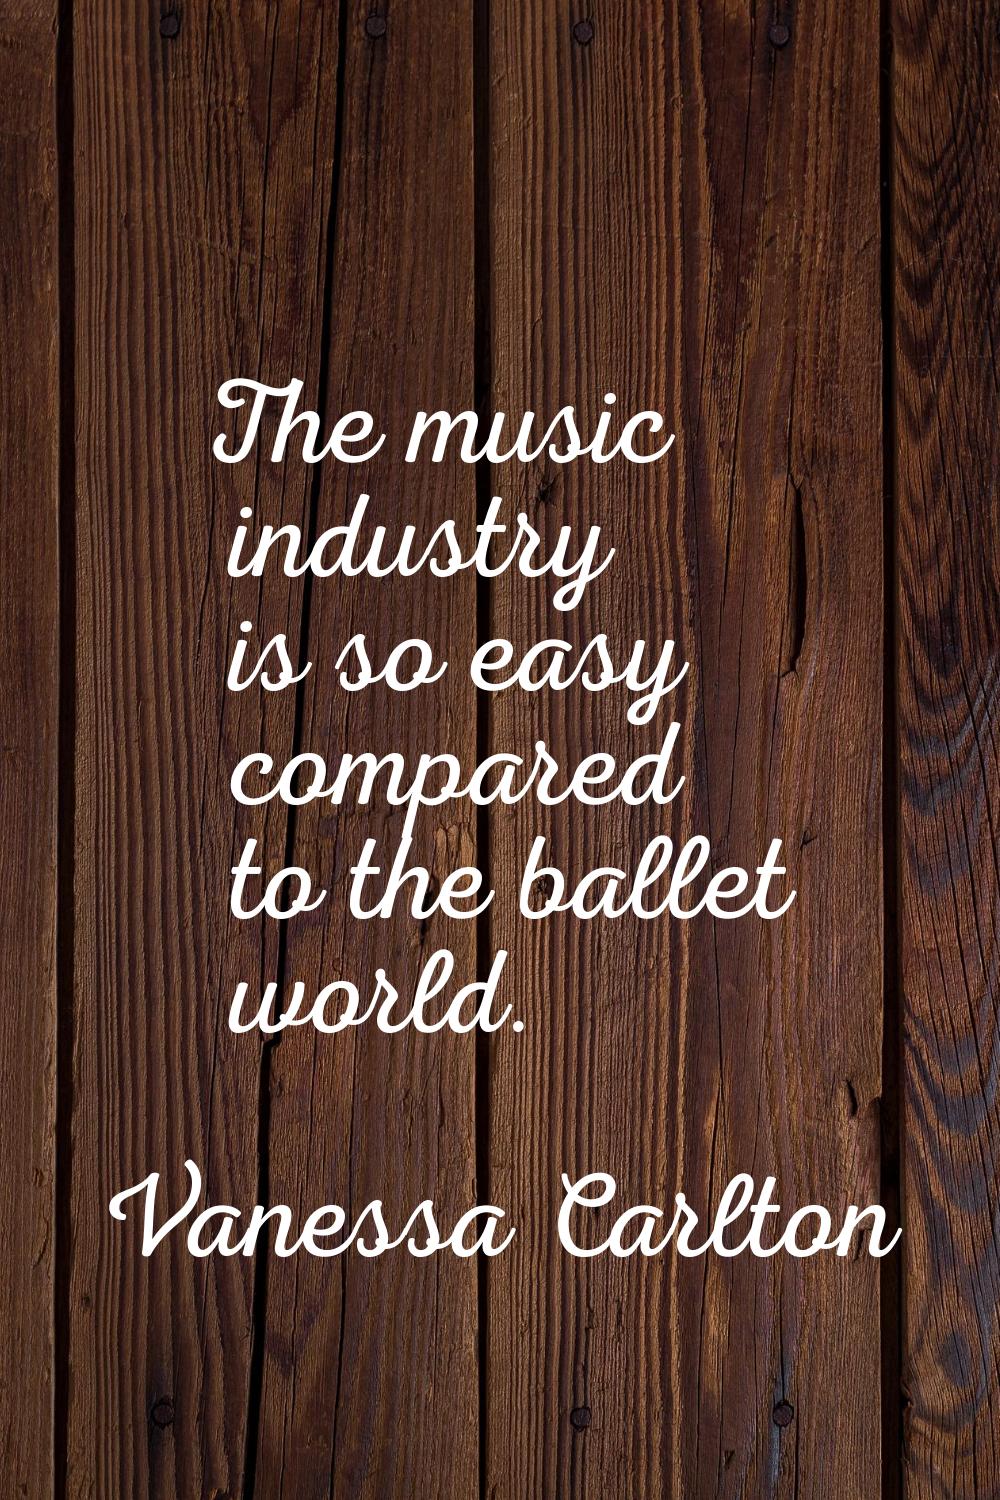 The music industry is so easy compared to the ballet world.